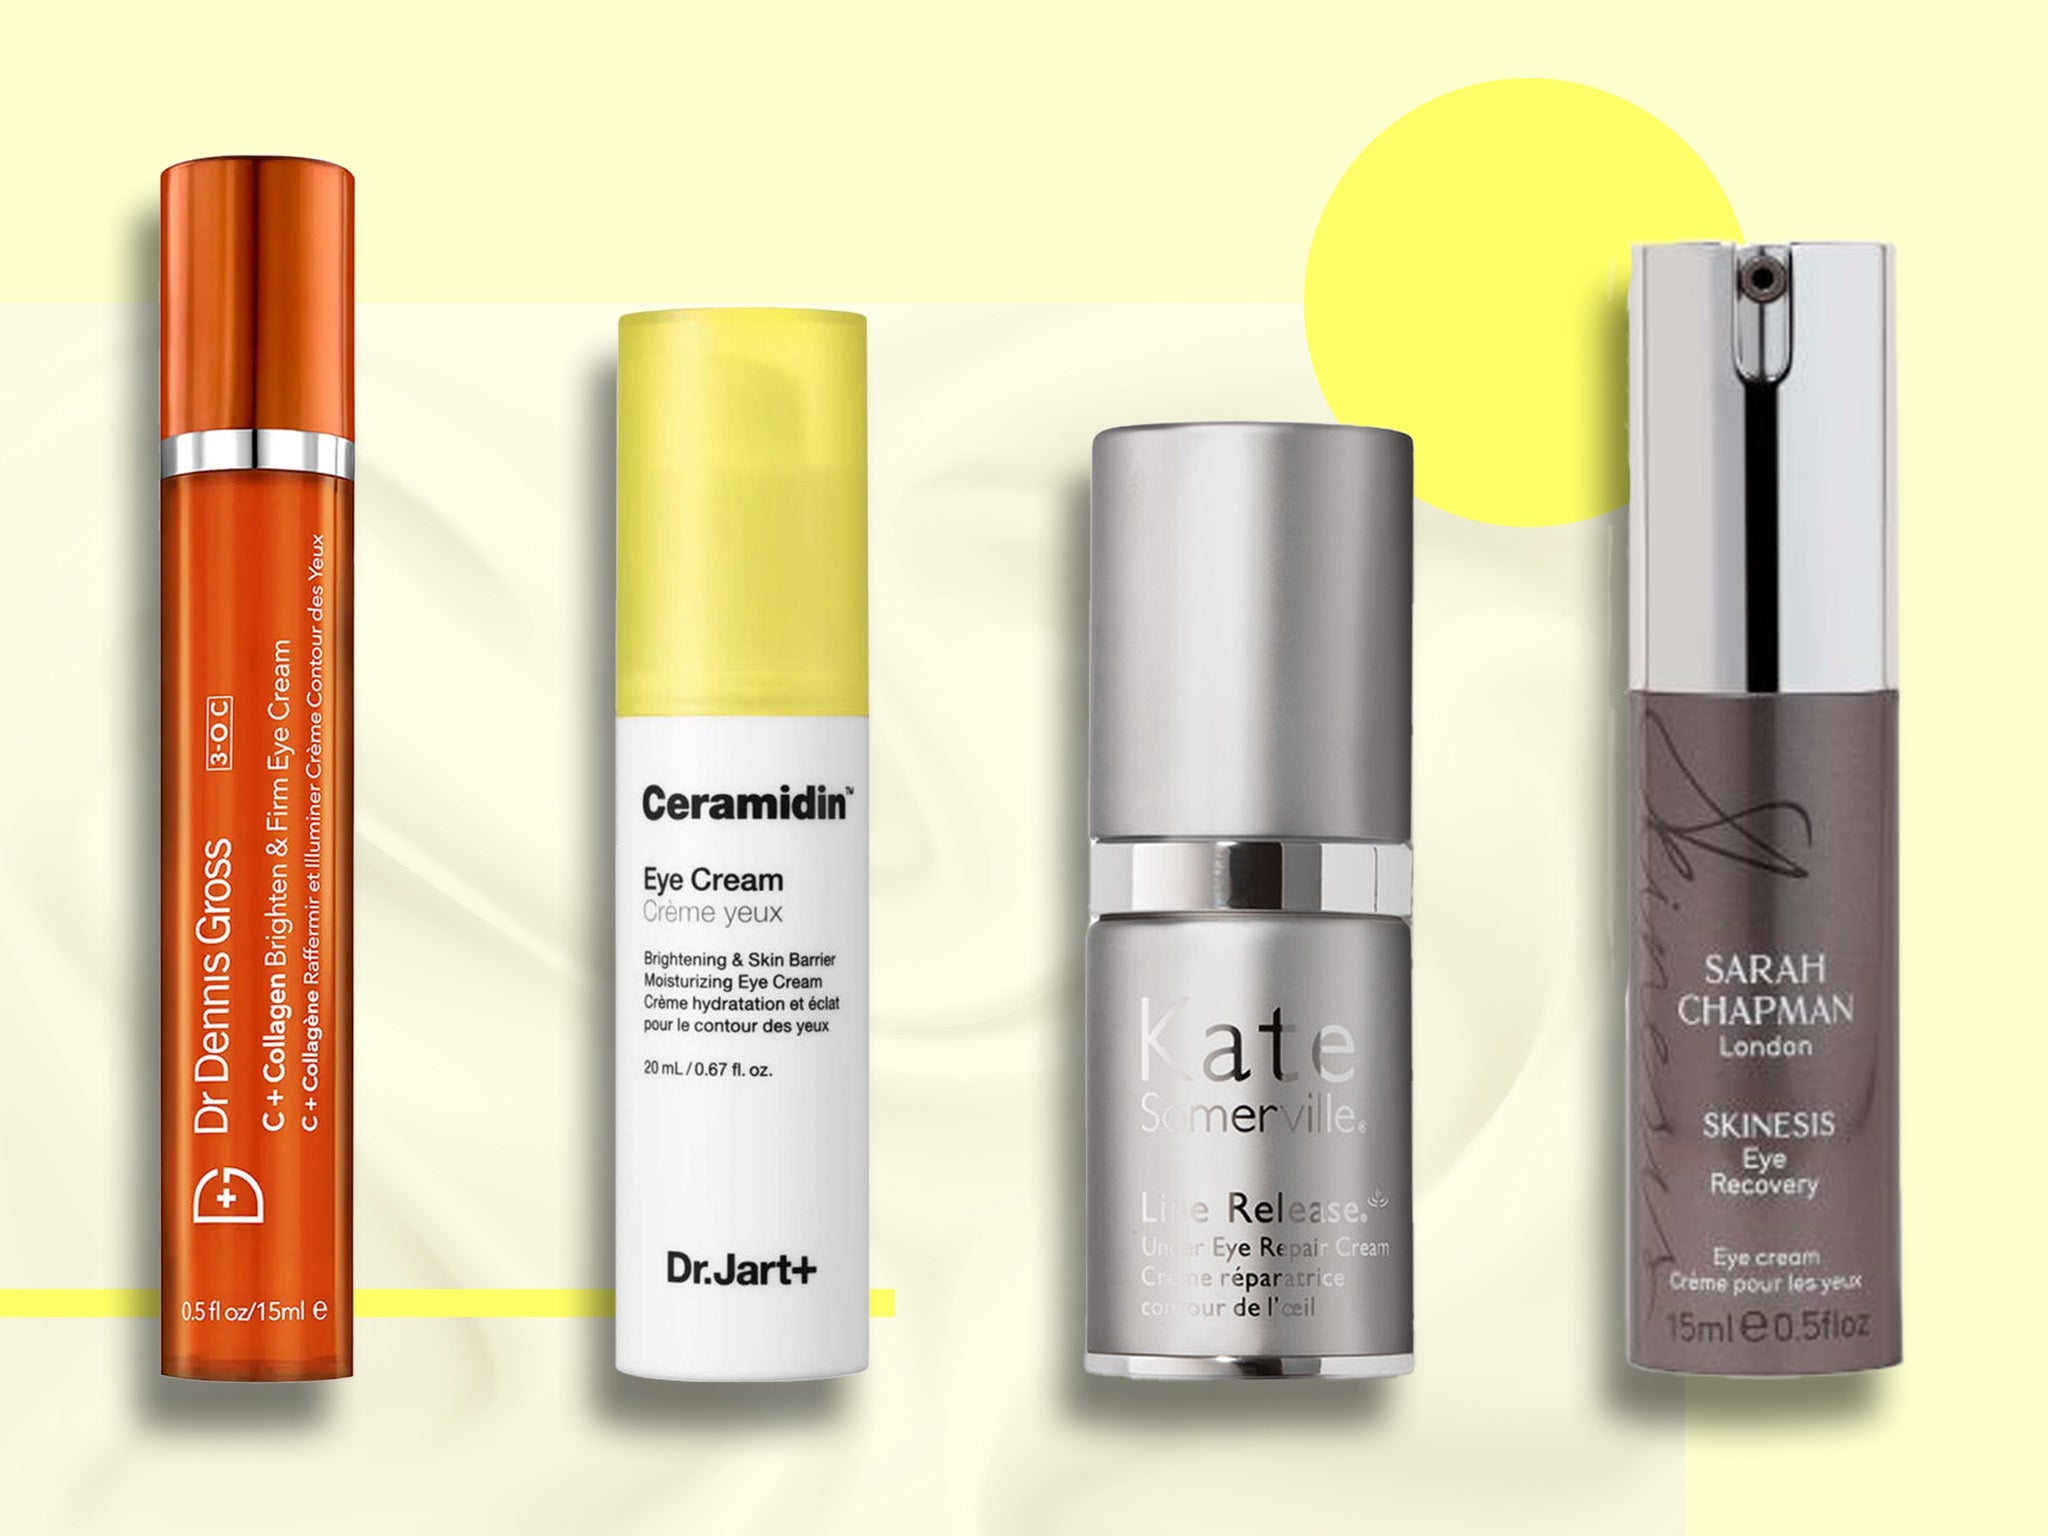 9 best eye creams to combat dark circles, wrinkles and puffiness 